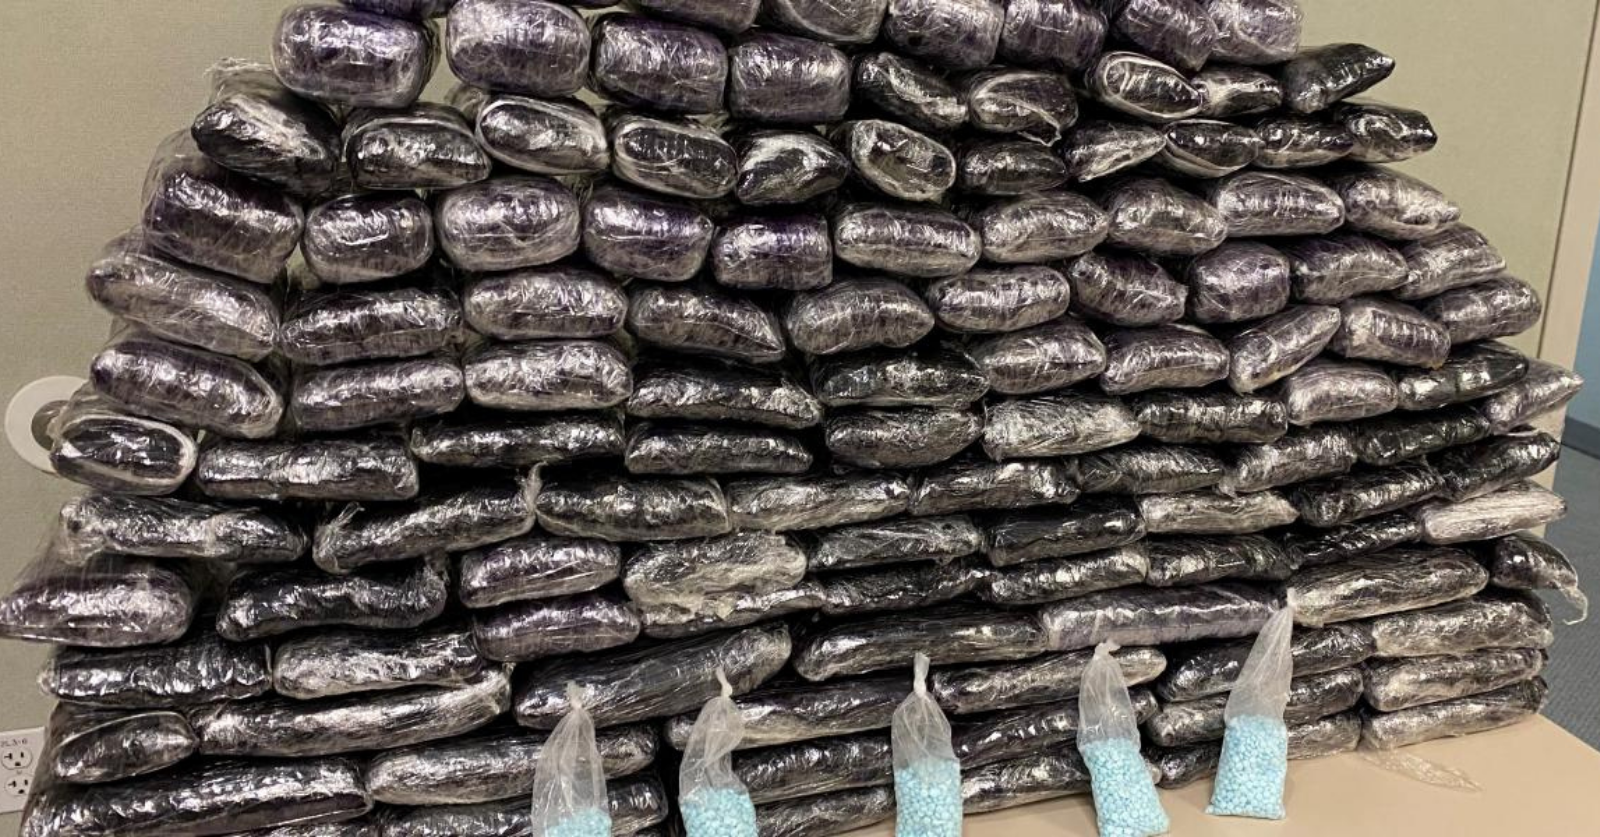 California seized enough fentanyl in 2023 to kill the world’s population nearly twice over